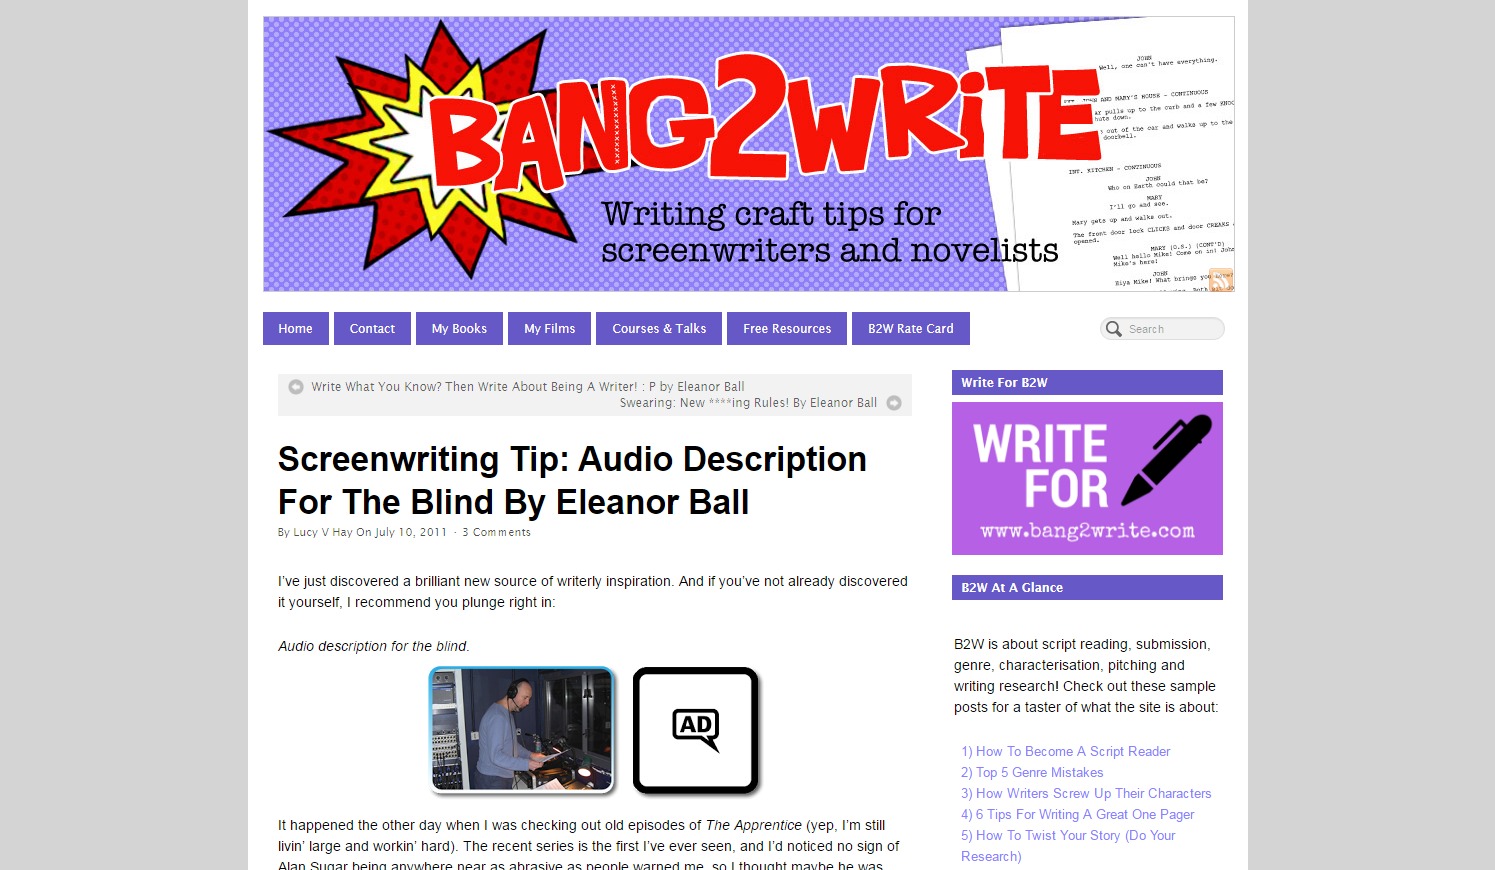 Image from: Screenwriting Tip: Audio Description for the Blind By Eleanor Ball